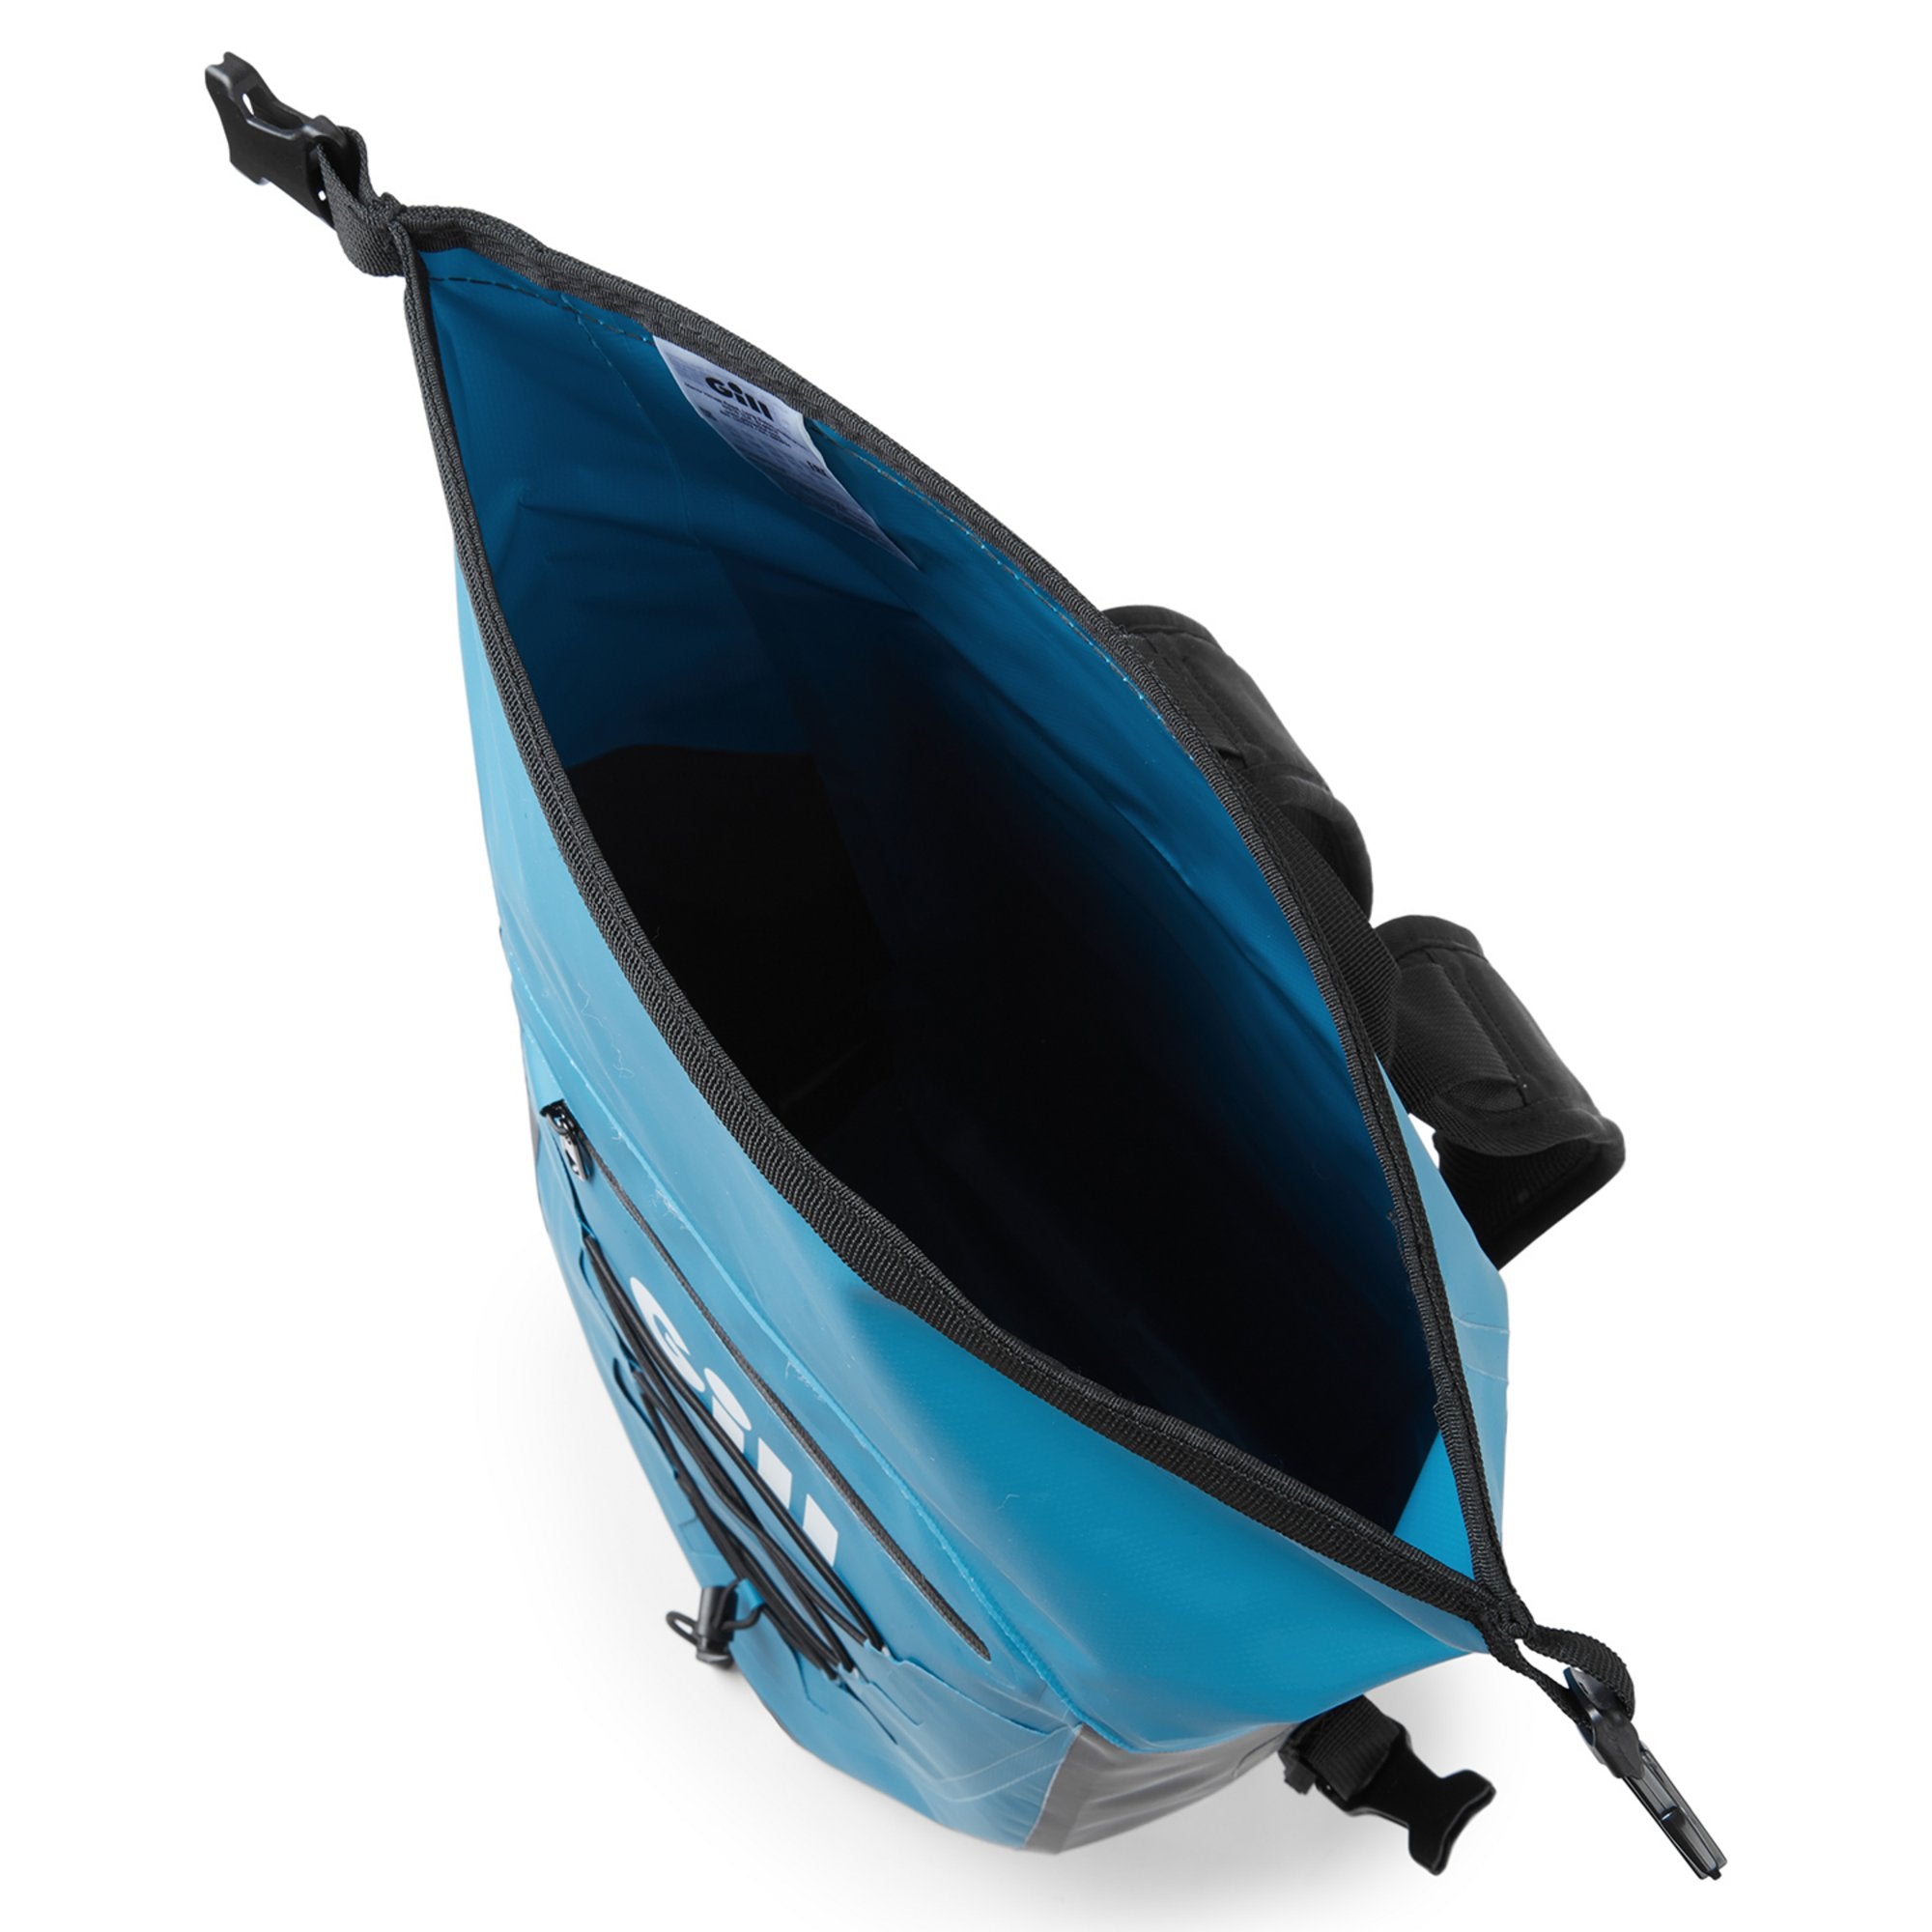 Gill Voyager Kit Pack - 35 Litre Special Edition